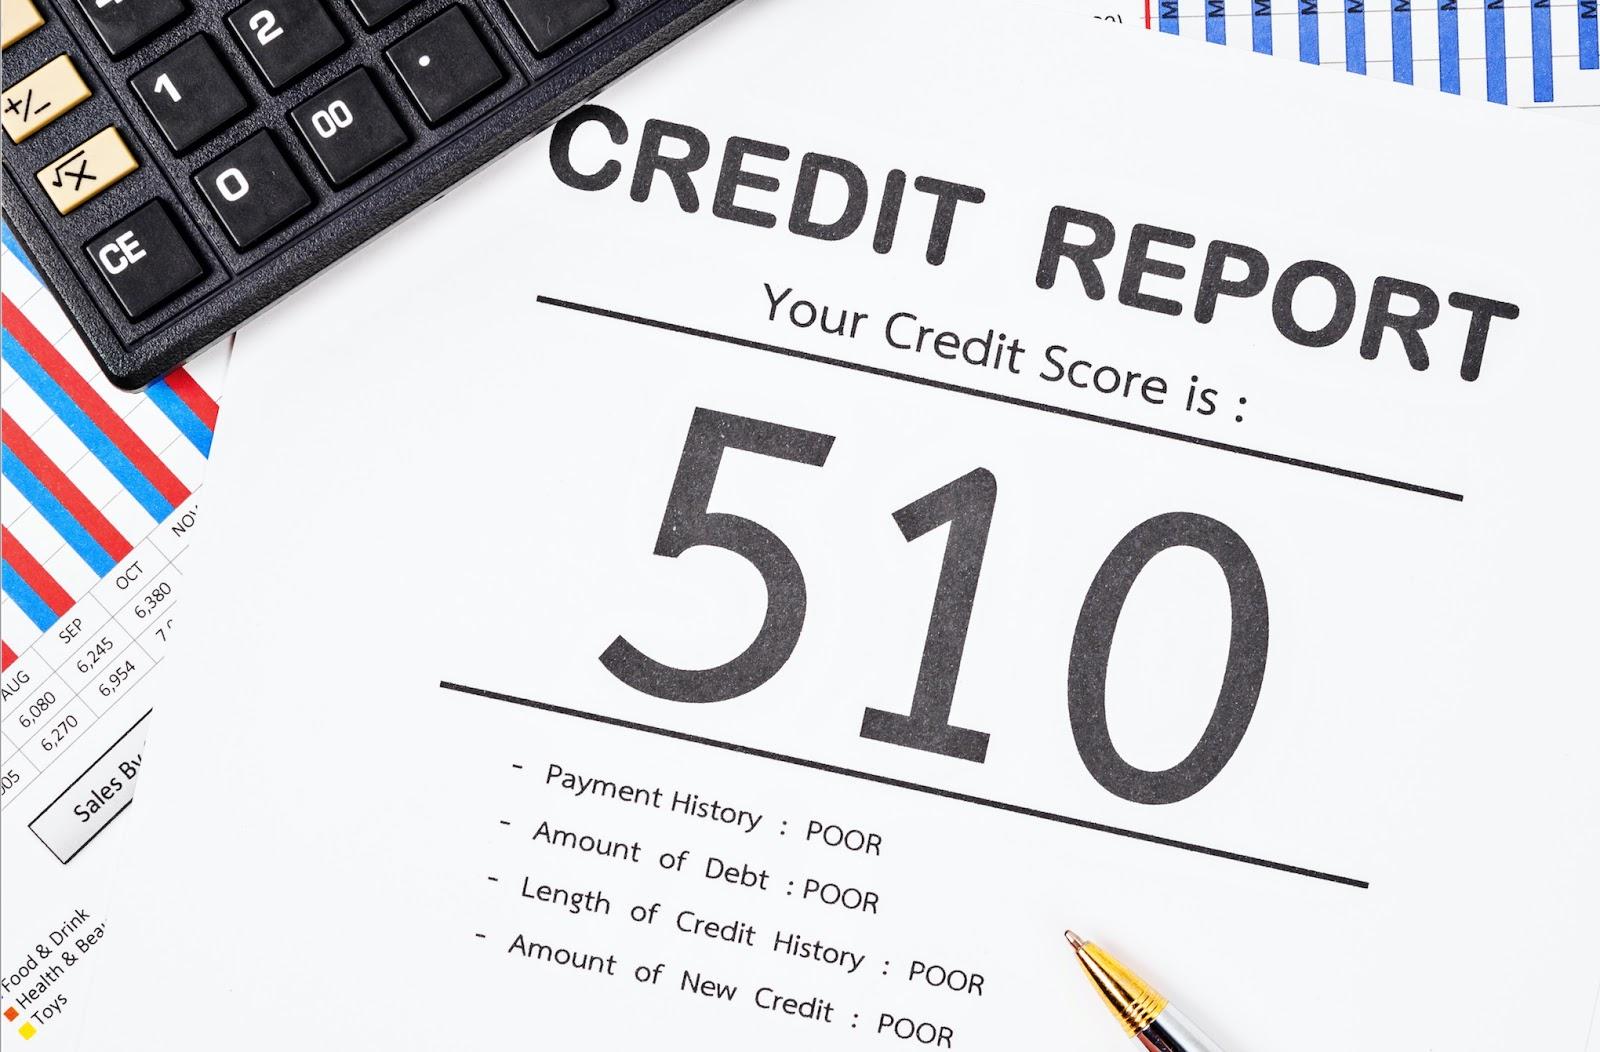 Preserving Your Credit Score: 7 Things To Watch Out For